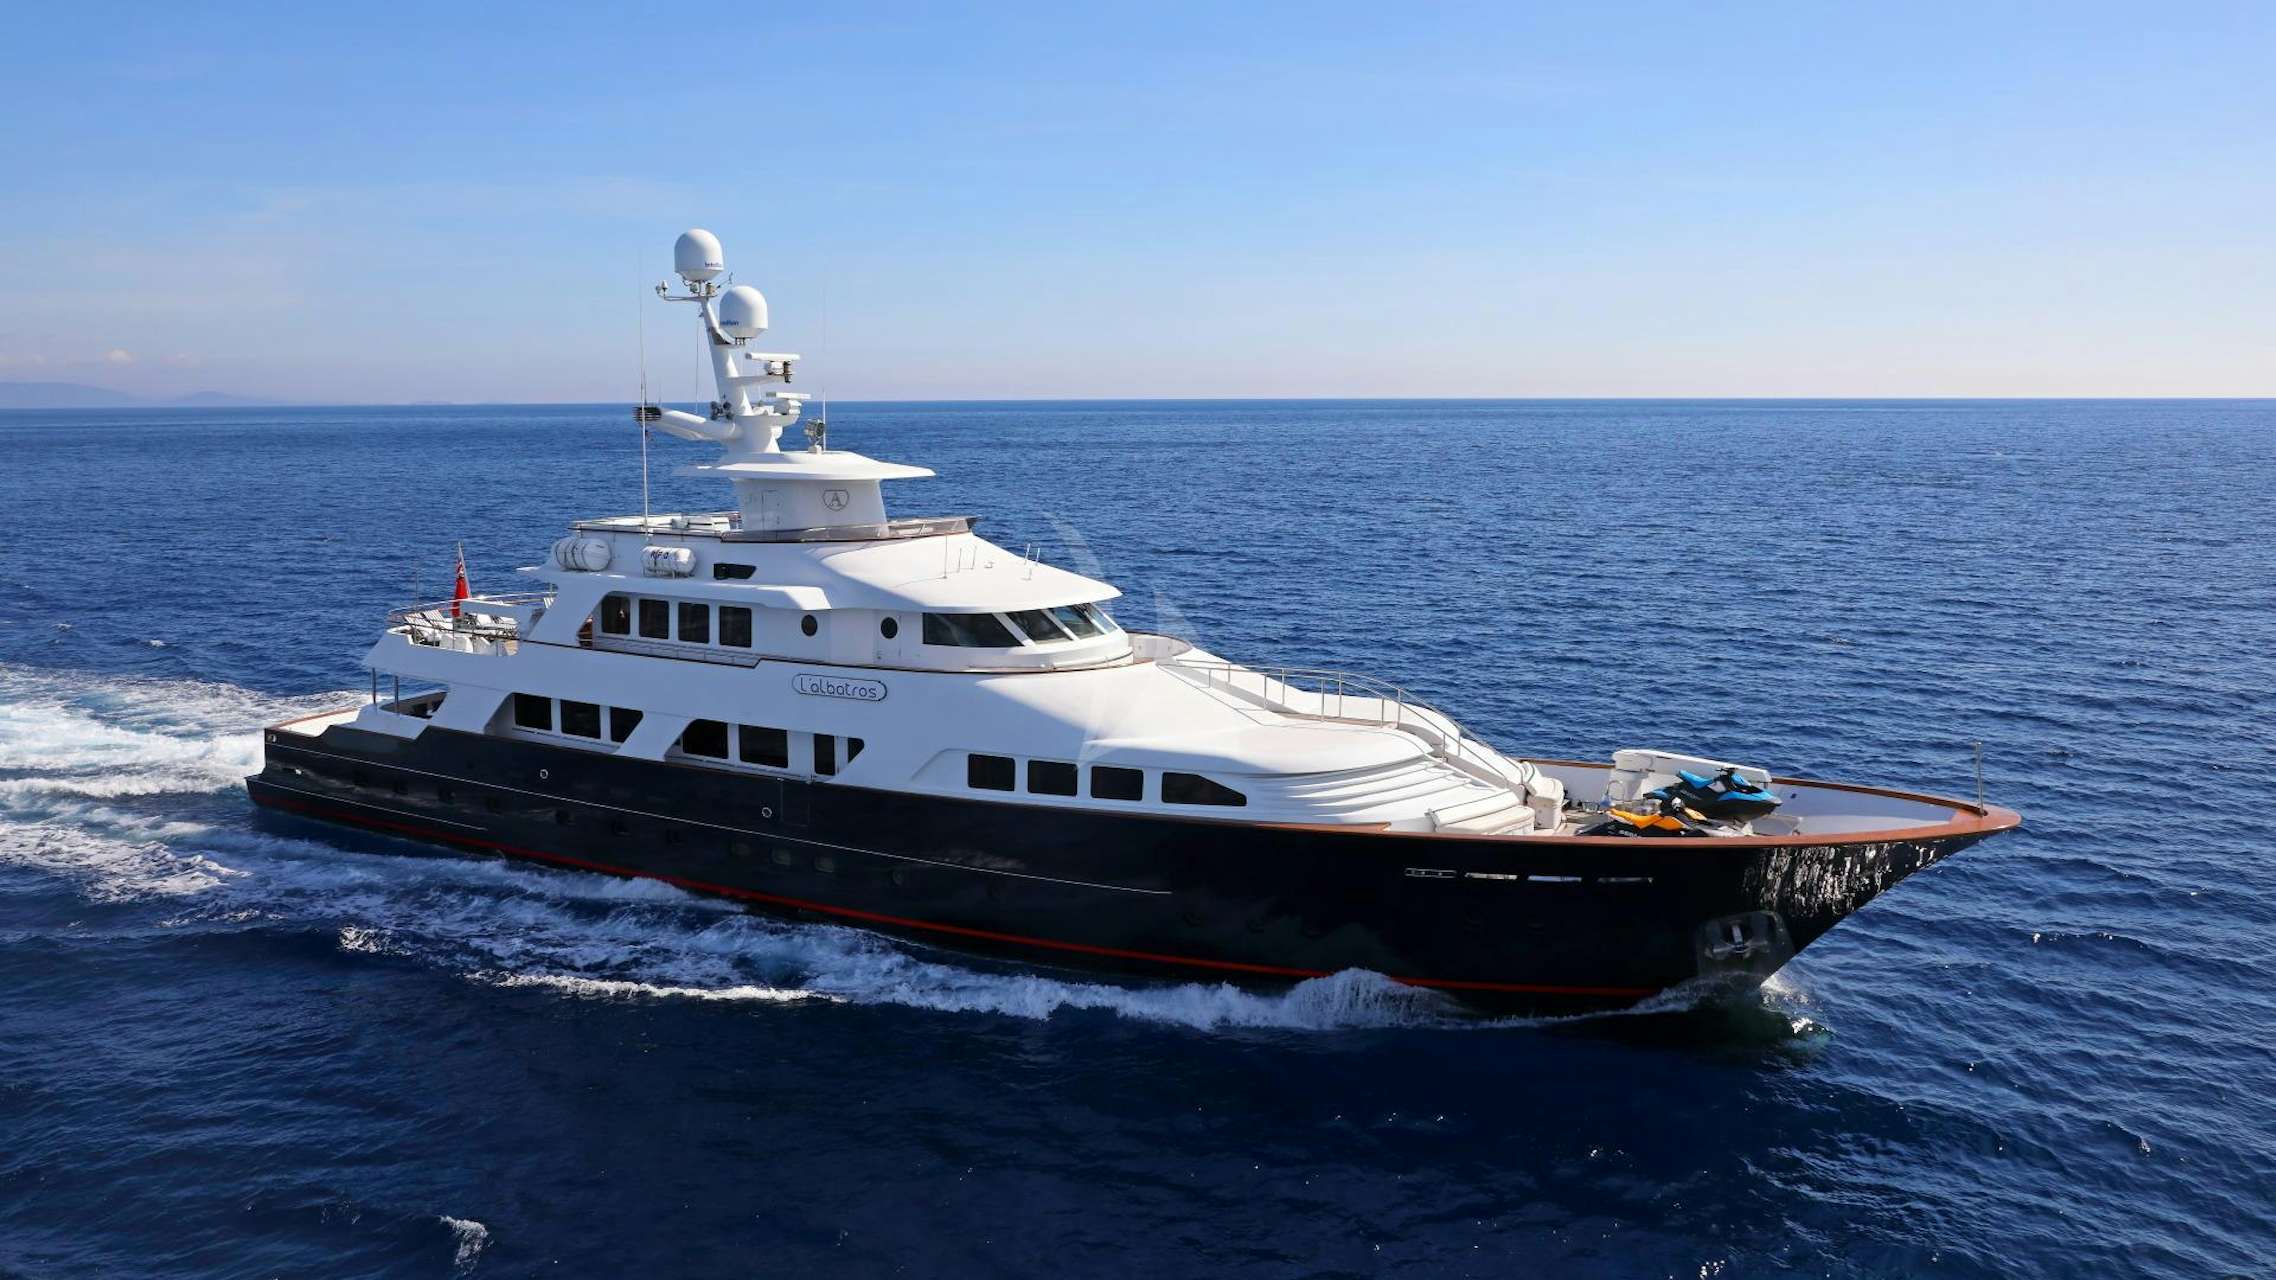 Watch Video for L'ALBATROS Yacht for Charter